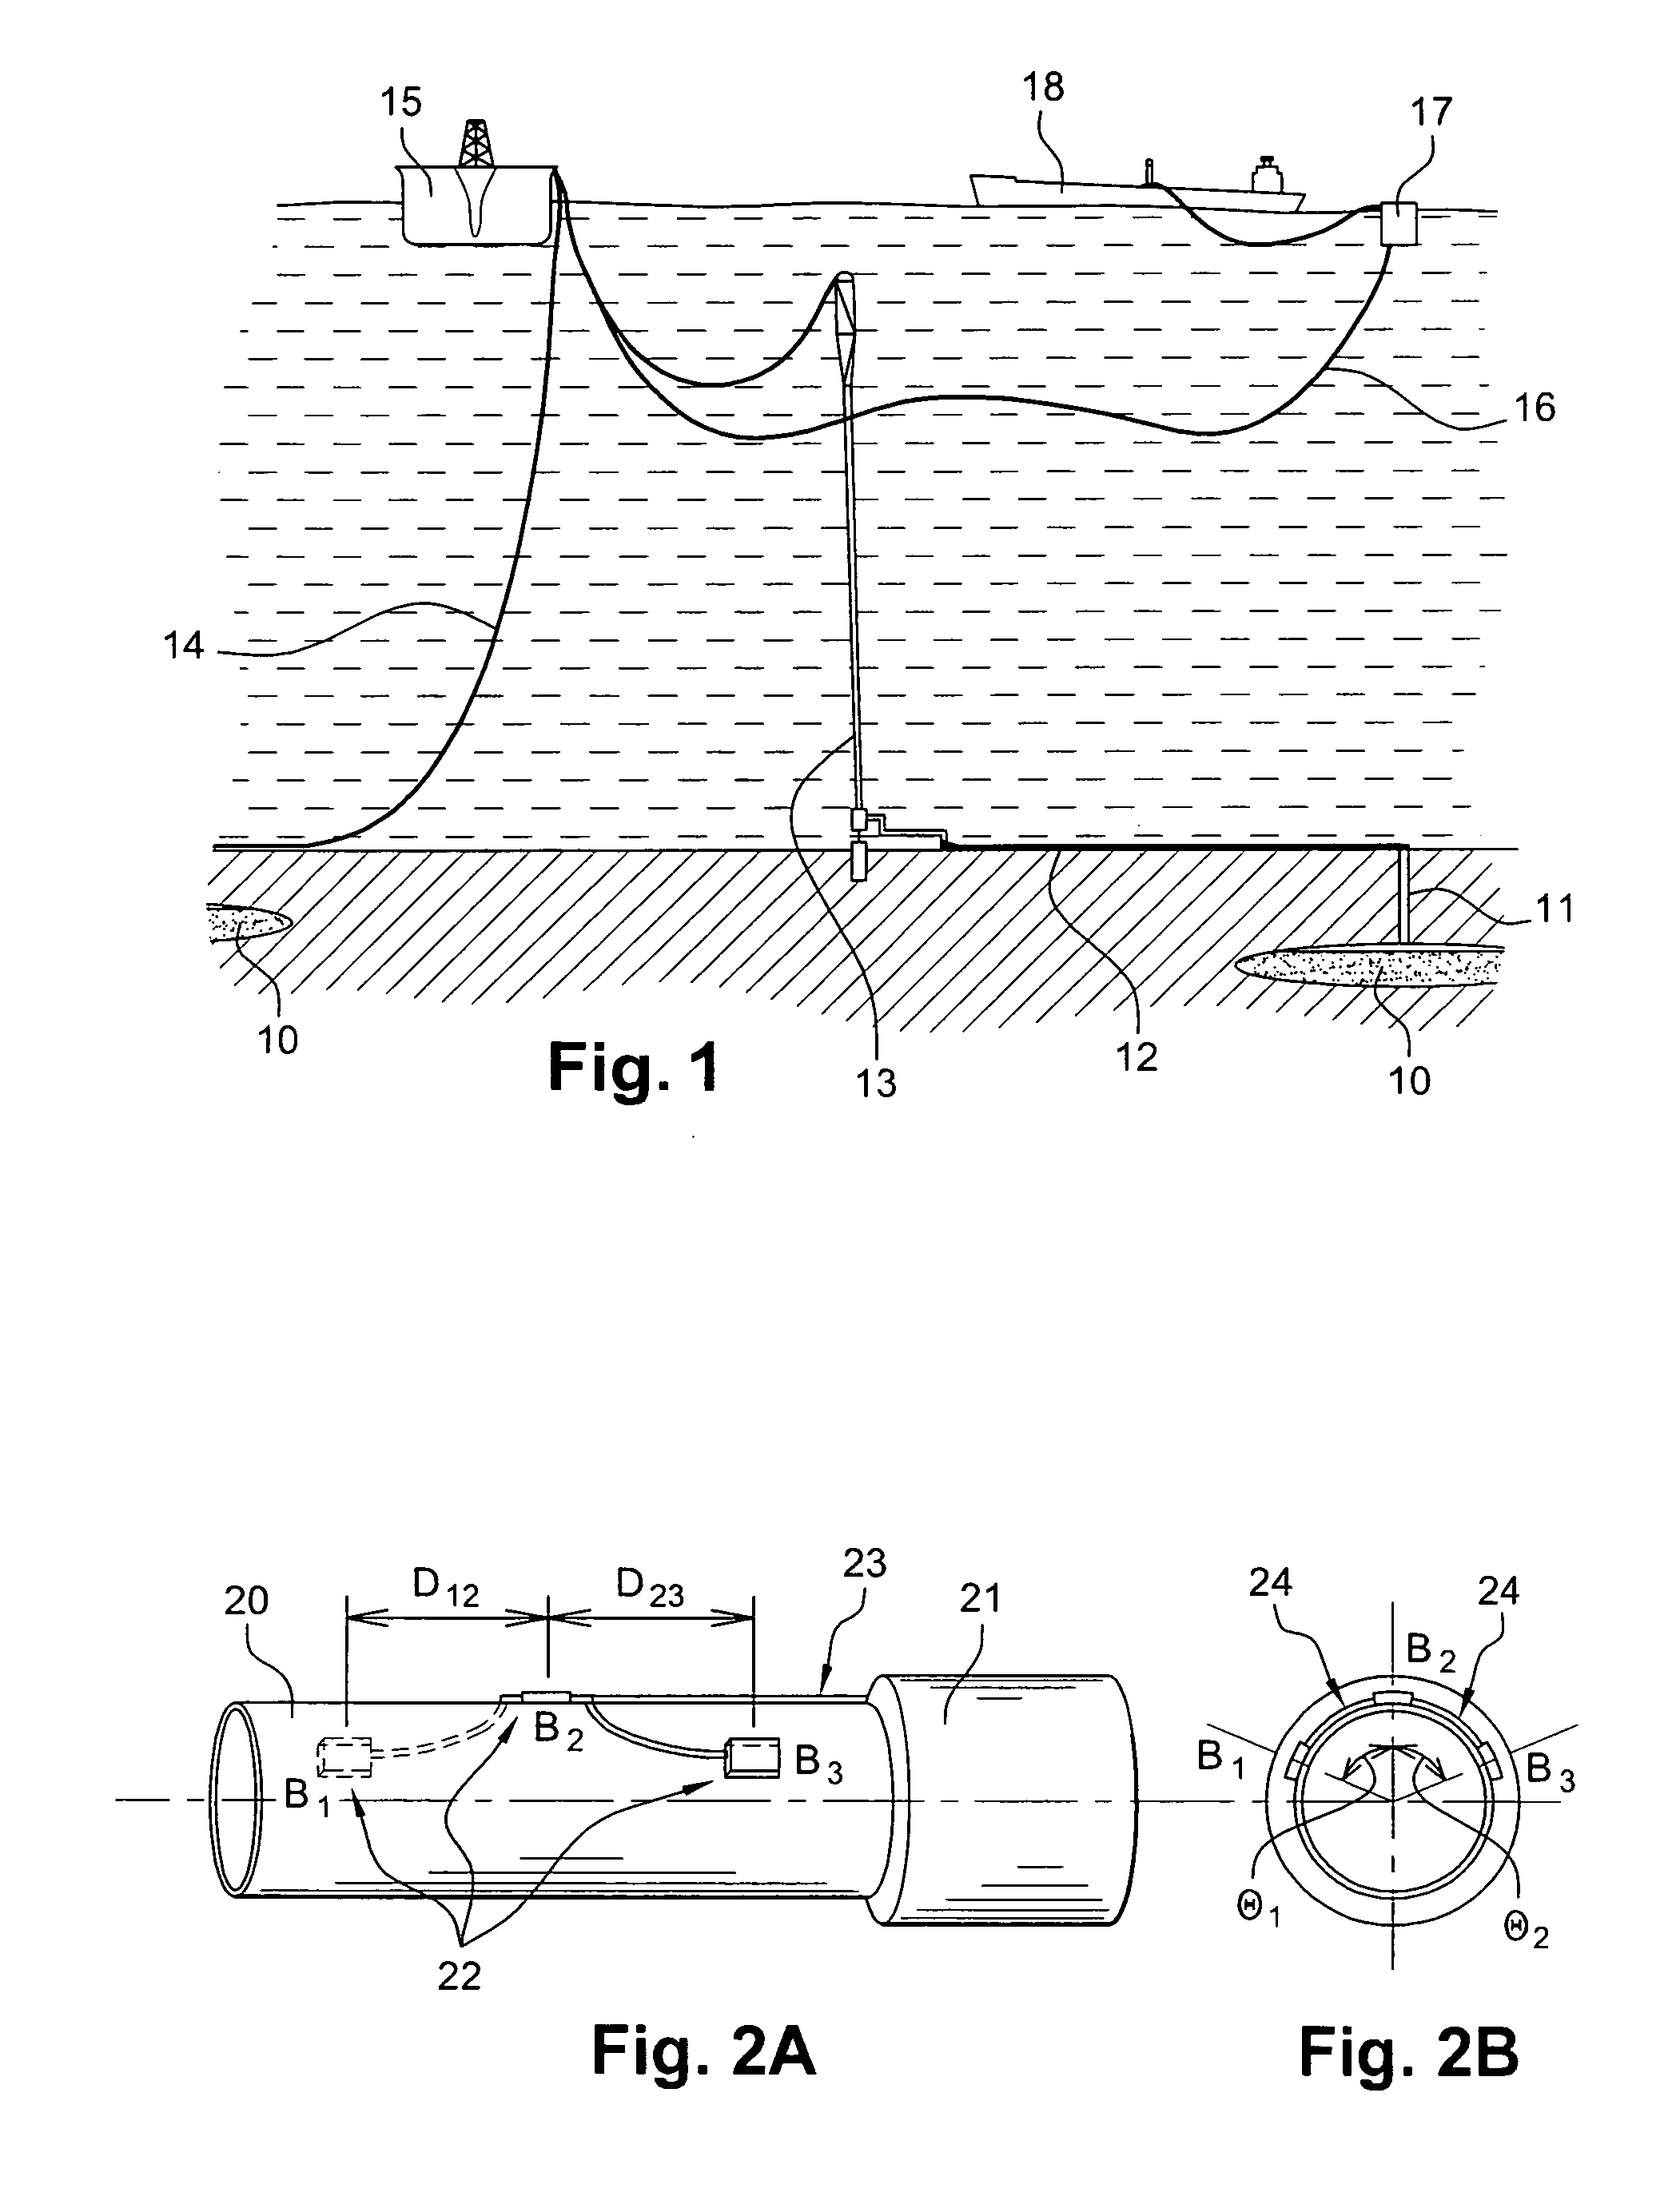 Instrumented Tabular Device for Transporting a Pressurized Fluid